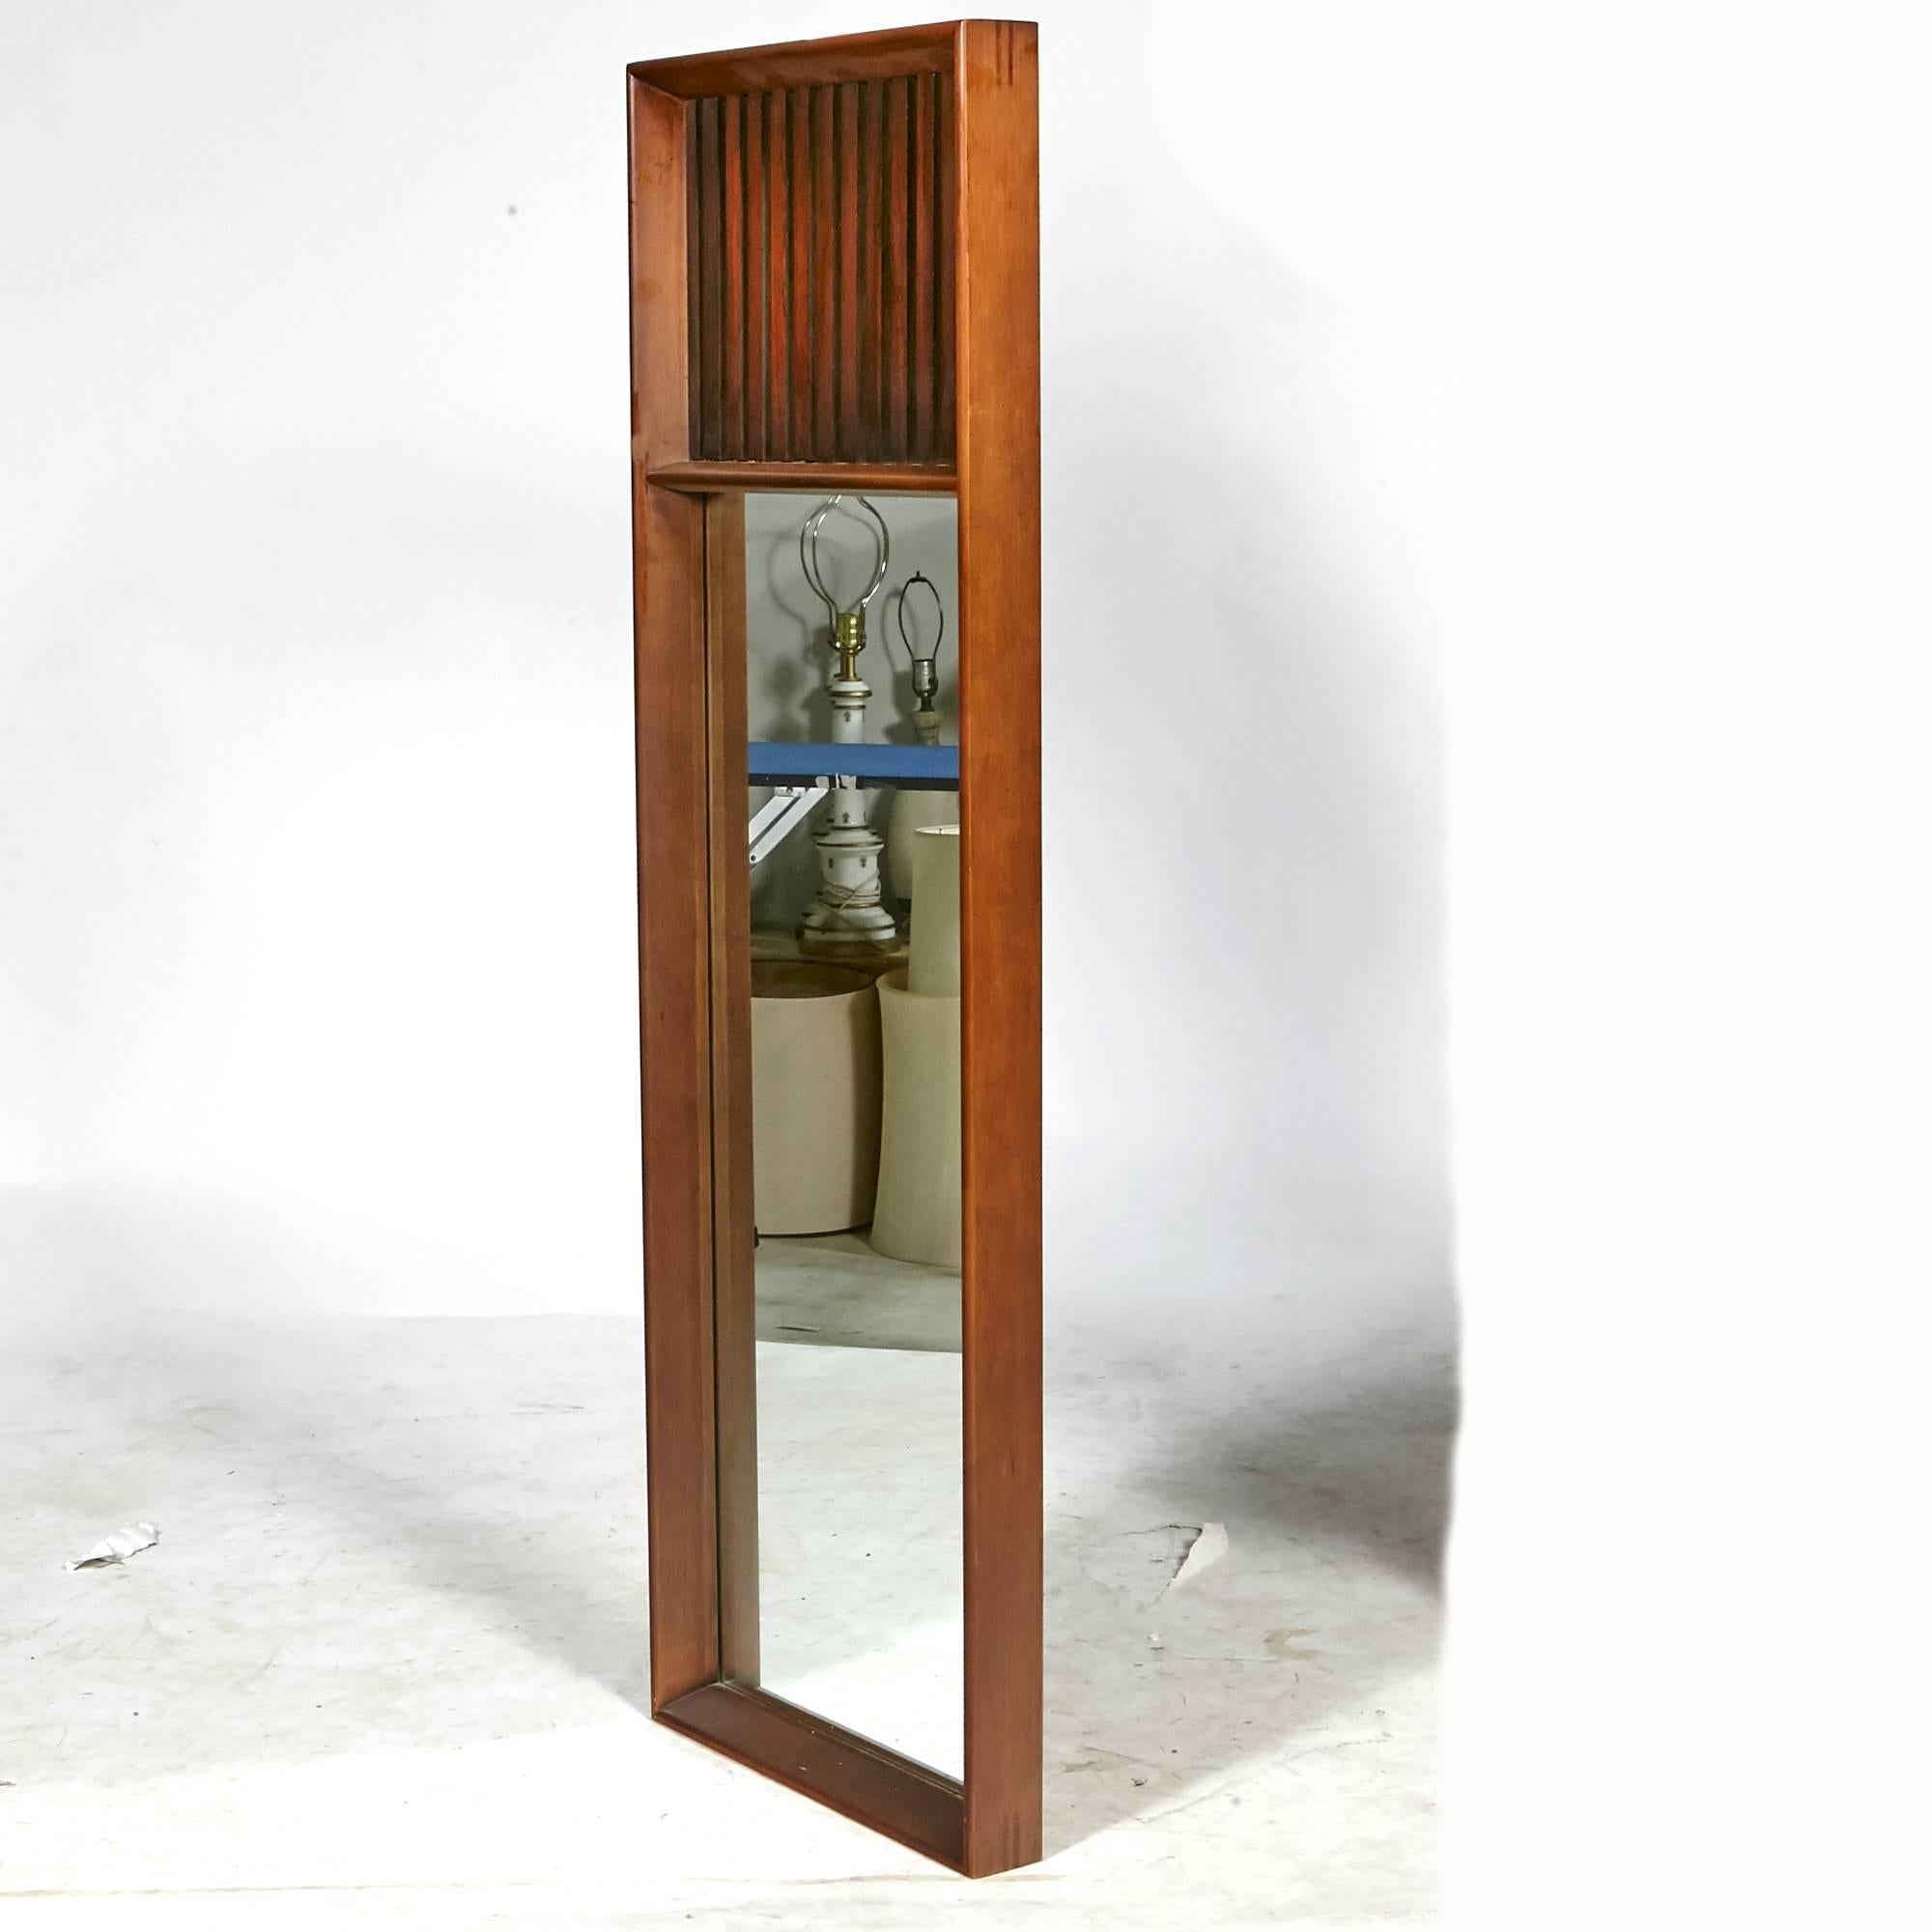 Vintage Mid-Century Modern pair of walnut framed and rosewood accented wall mirrors designed by Lane Furniture Company.